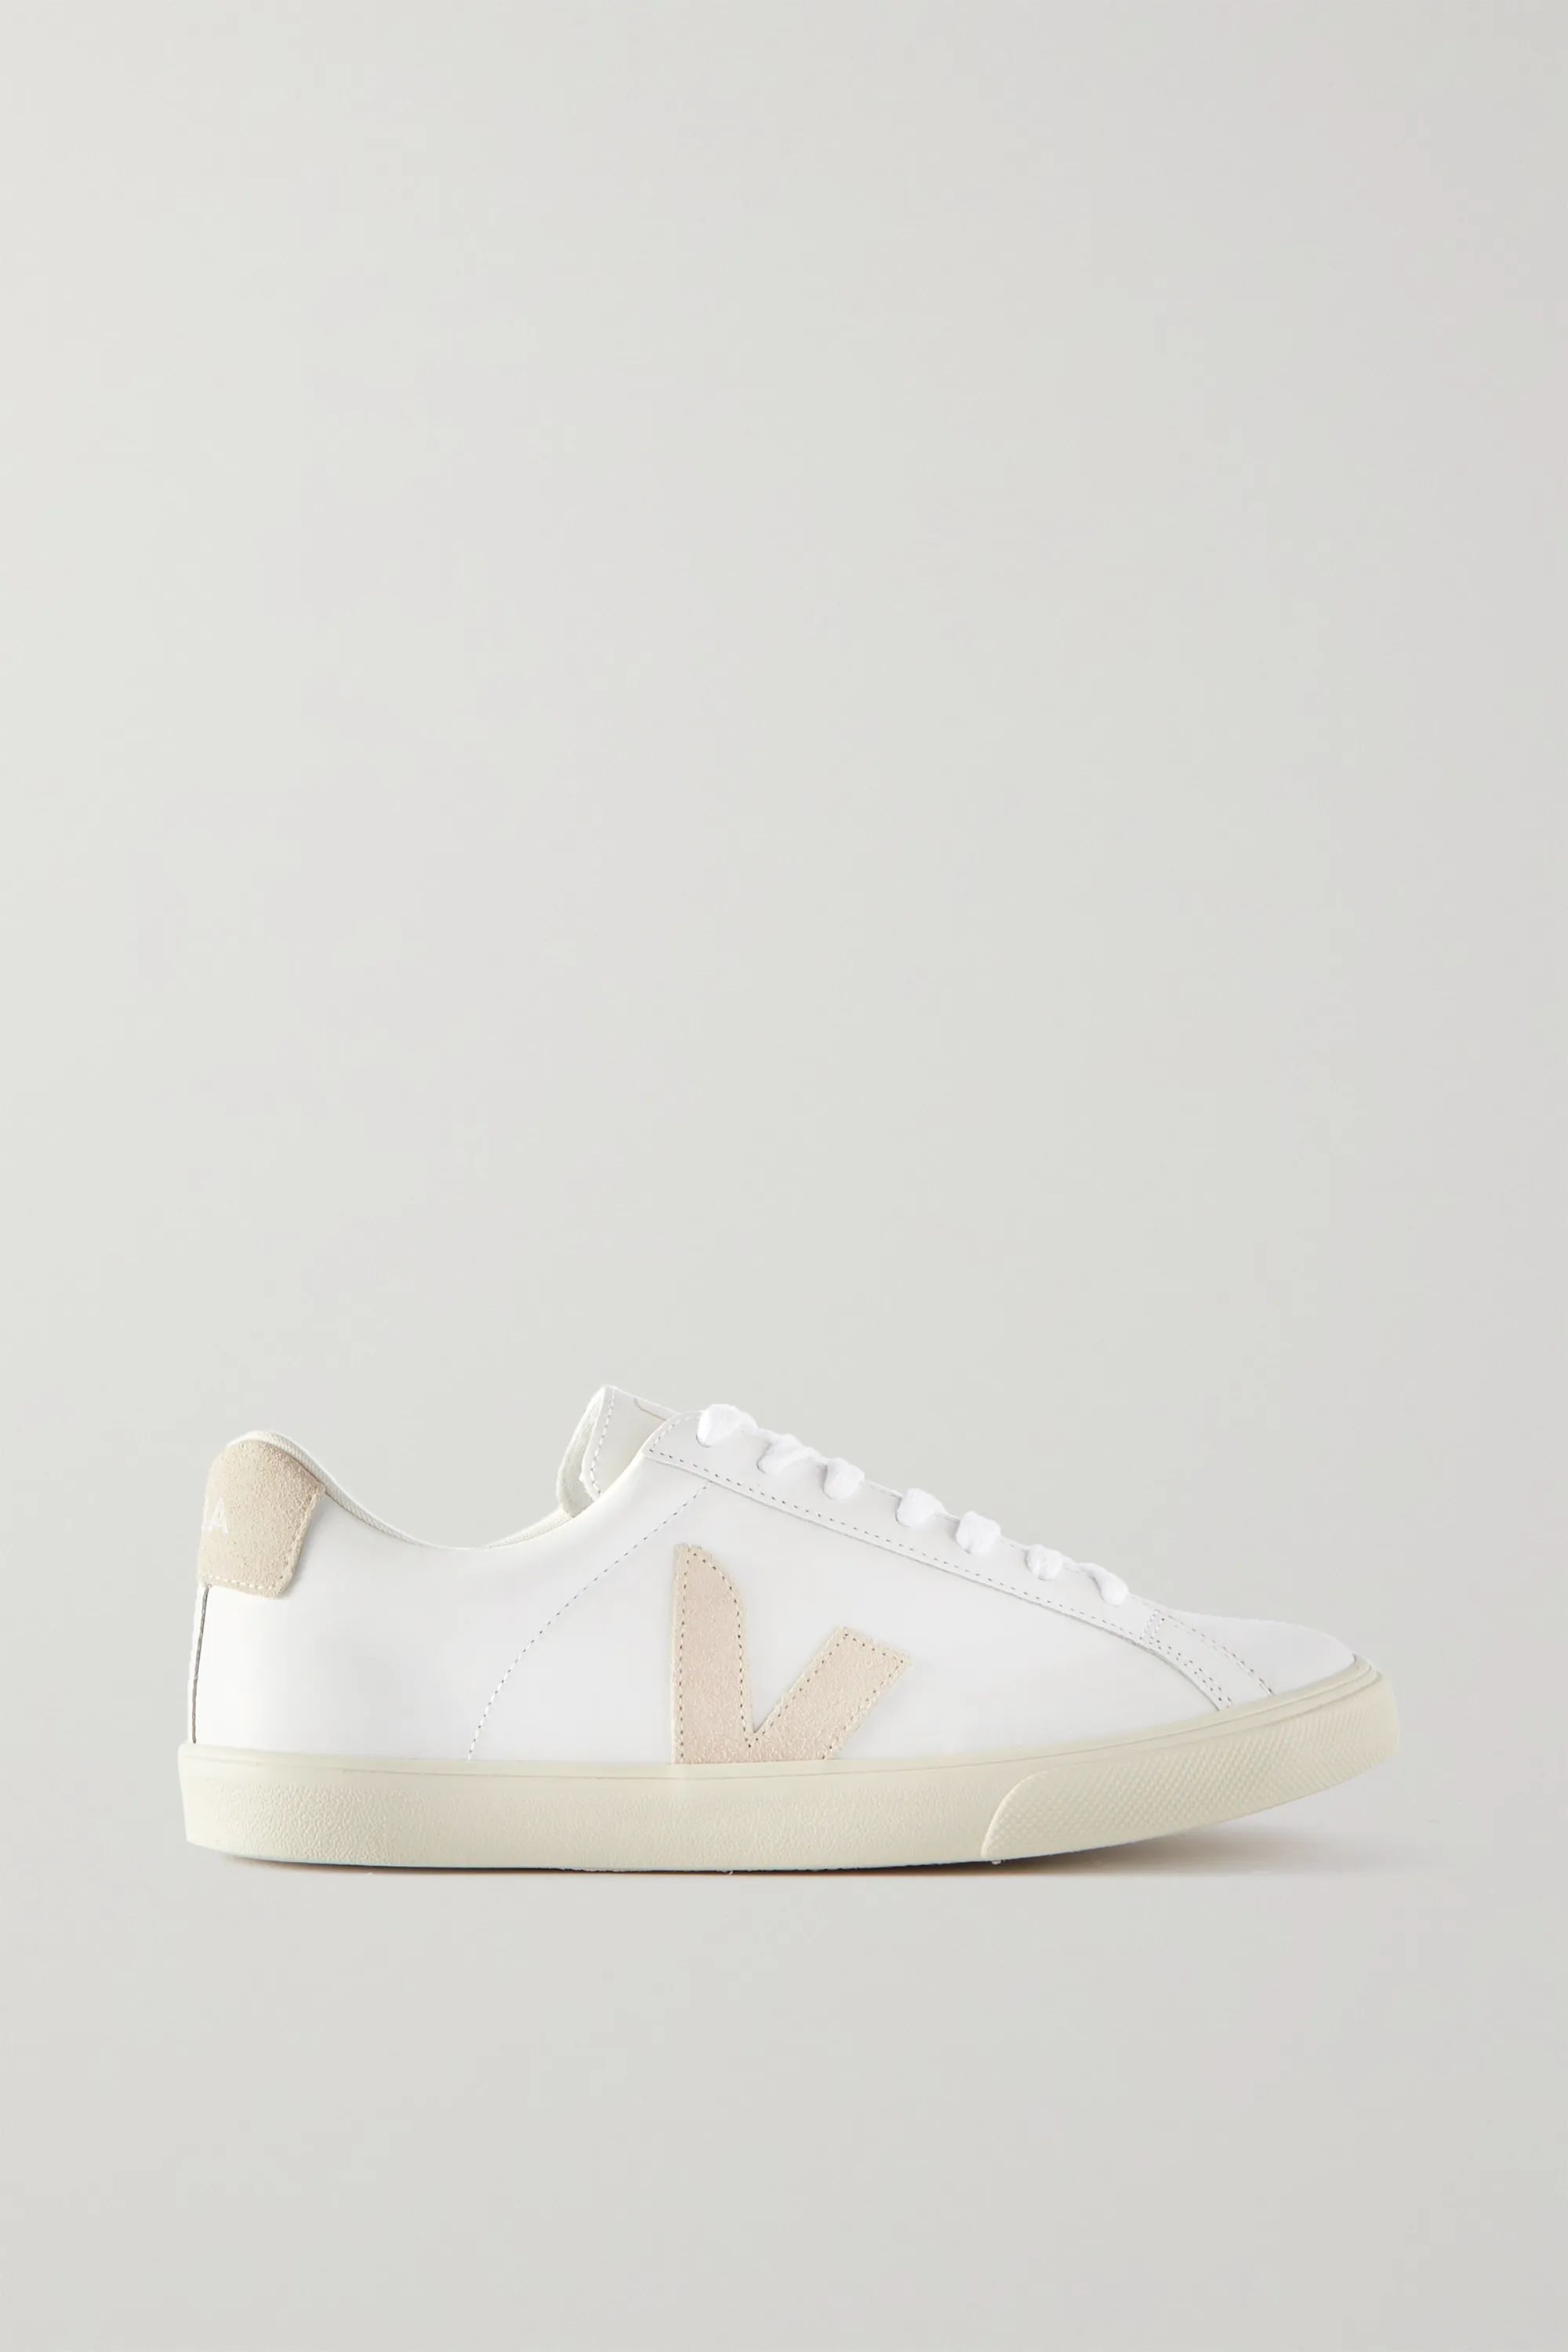 + NET SUSTAIN Esplar leather and suede sneakers | NET-A-PORTER (US)